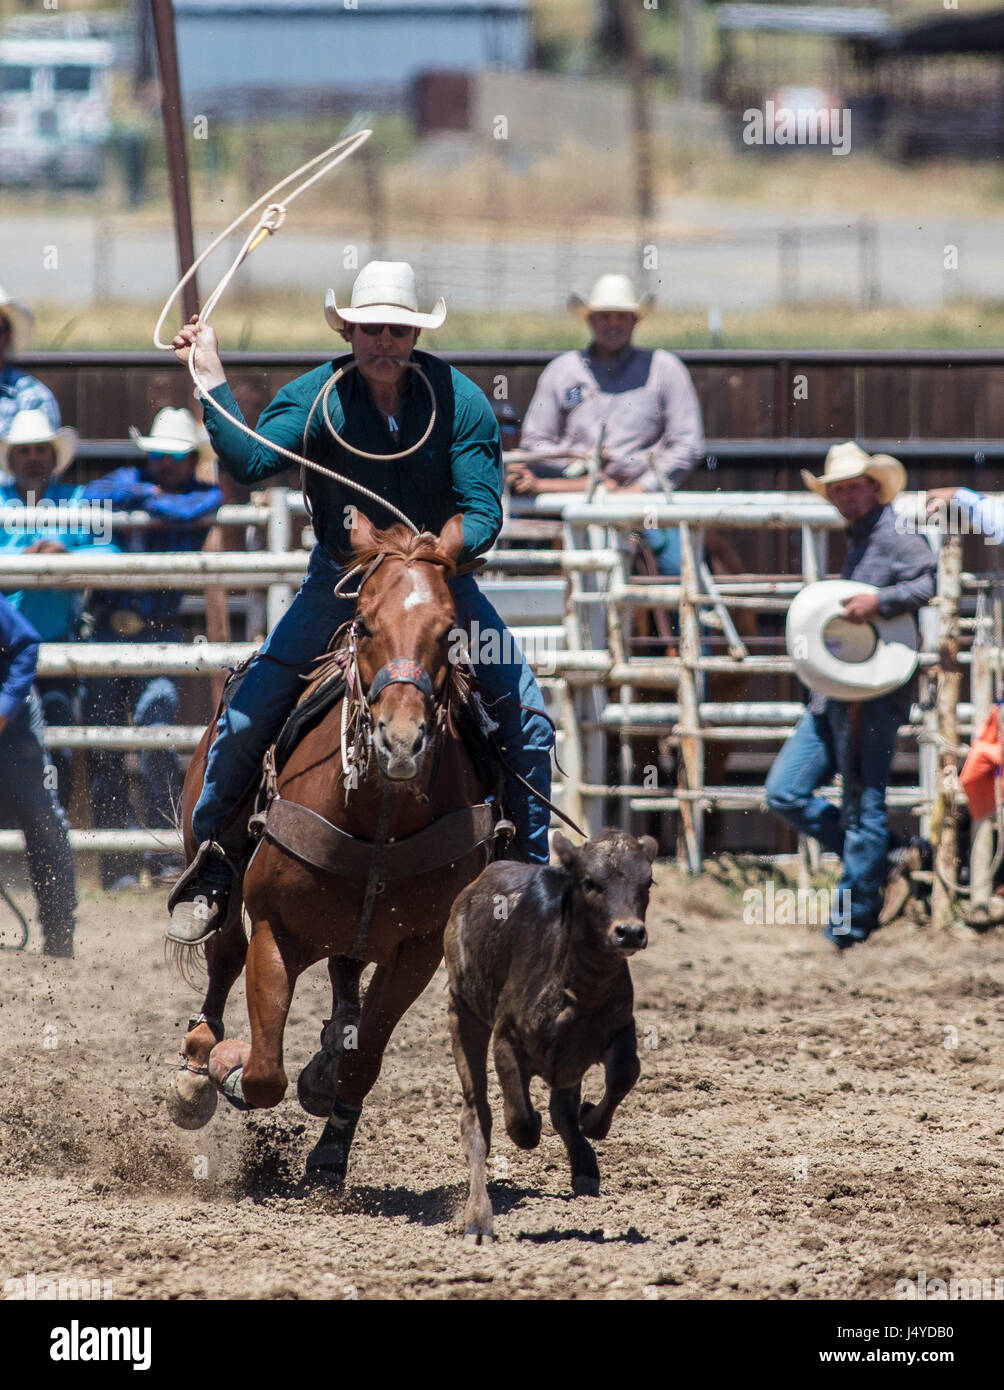 Calf roping action at the Cottonwood Rodeo in California. Stock Photo